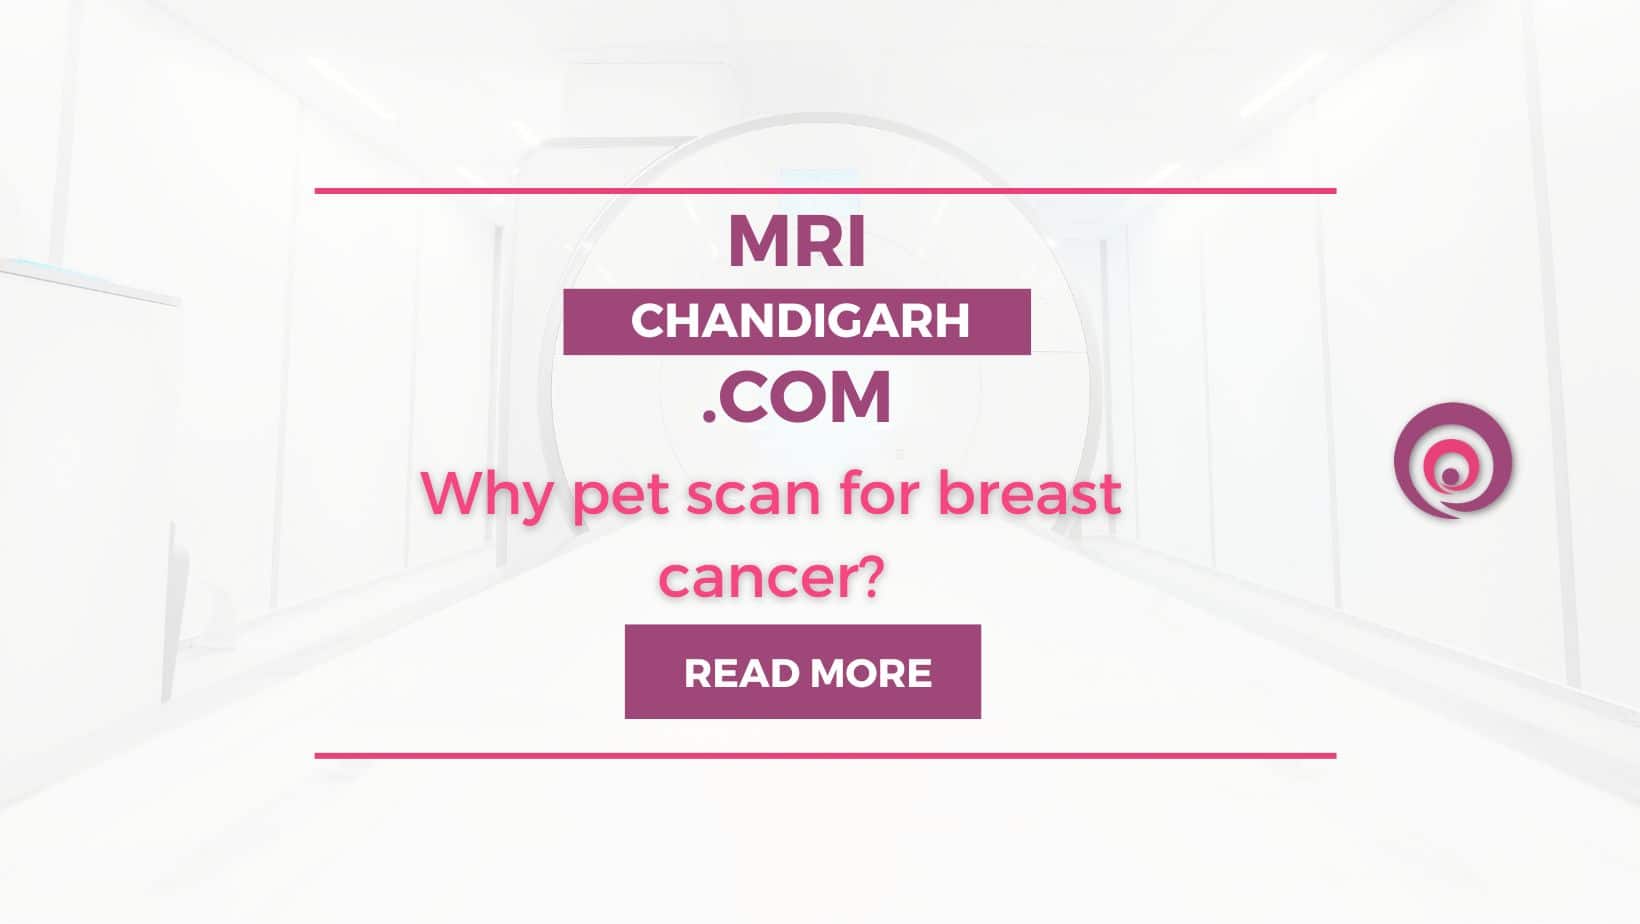 Why pet scan for breast cancer?